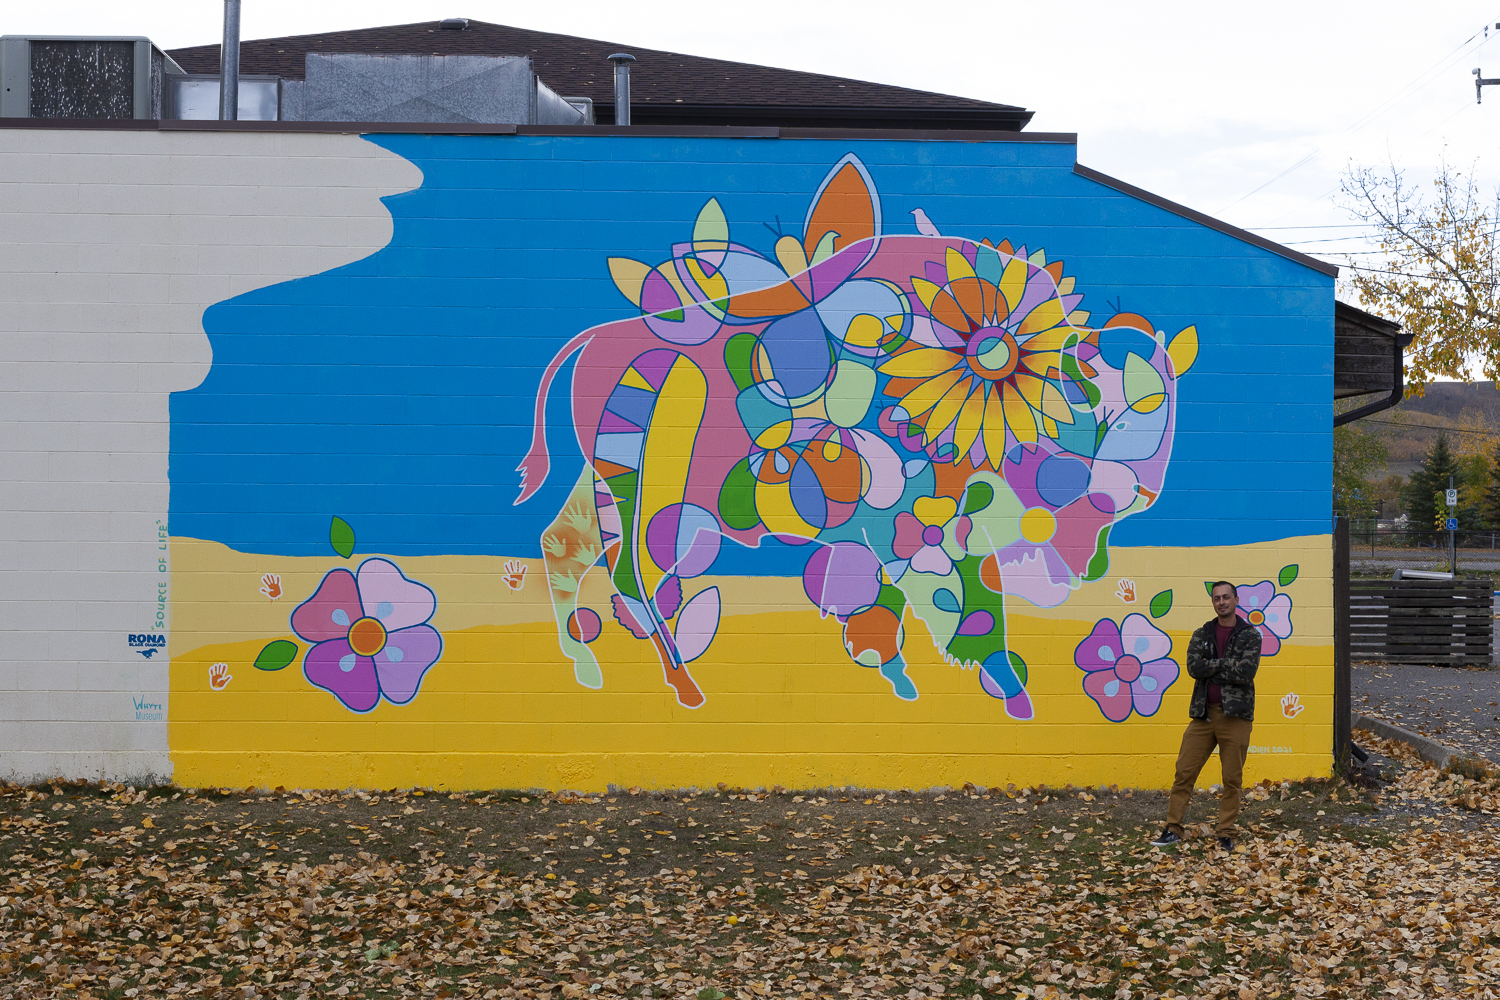 Photo of Bruno Canadien’s mural “Source of Life” it is on a brick building, Bruno is standing in front of it, looking at the camera It features geometric shapes and motifs that form a buffalo - there are colours of pink, green, yellow, and purple on a blue background. Part of the overcast sky is showing on the top right corner.